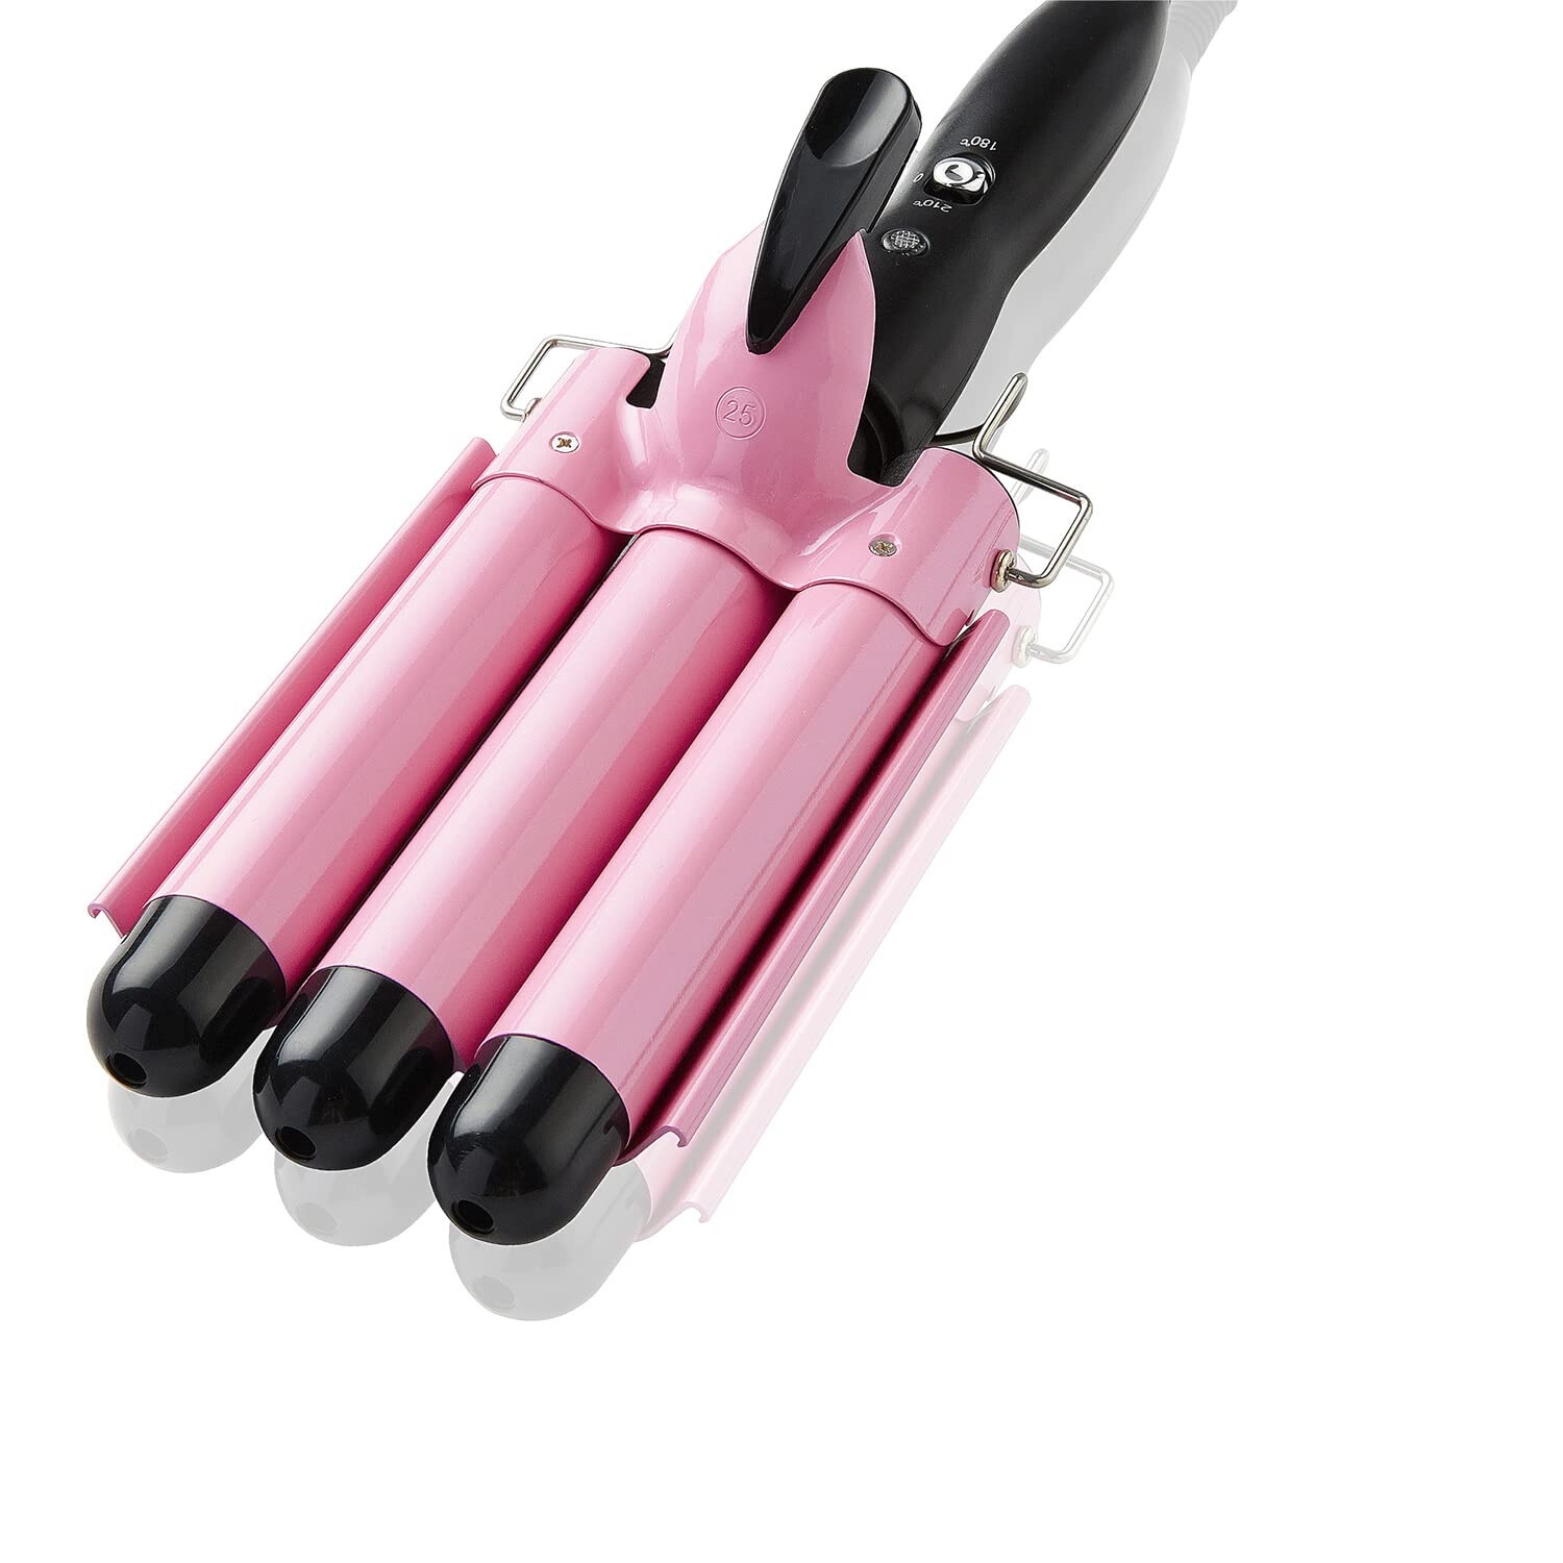 

3 Barrel Curling Iron Hair Crimper, 25mm(1 Inch) Professional Hair Curling Wand With 2 Temperature Control,fast Heating Portable Crimpers For Waving Hair